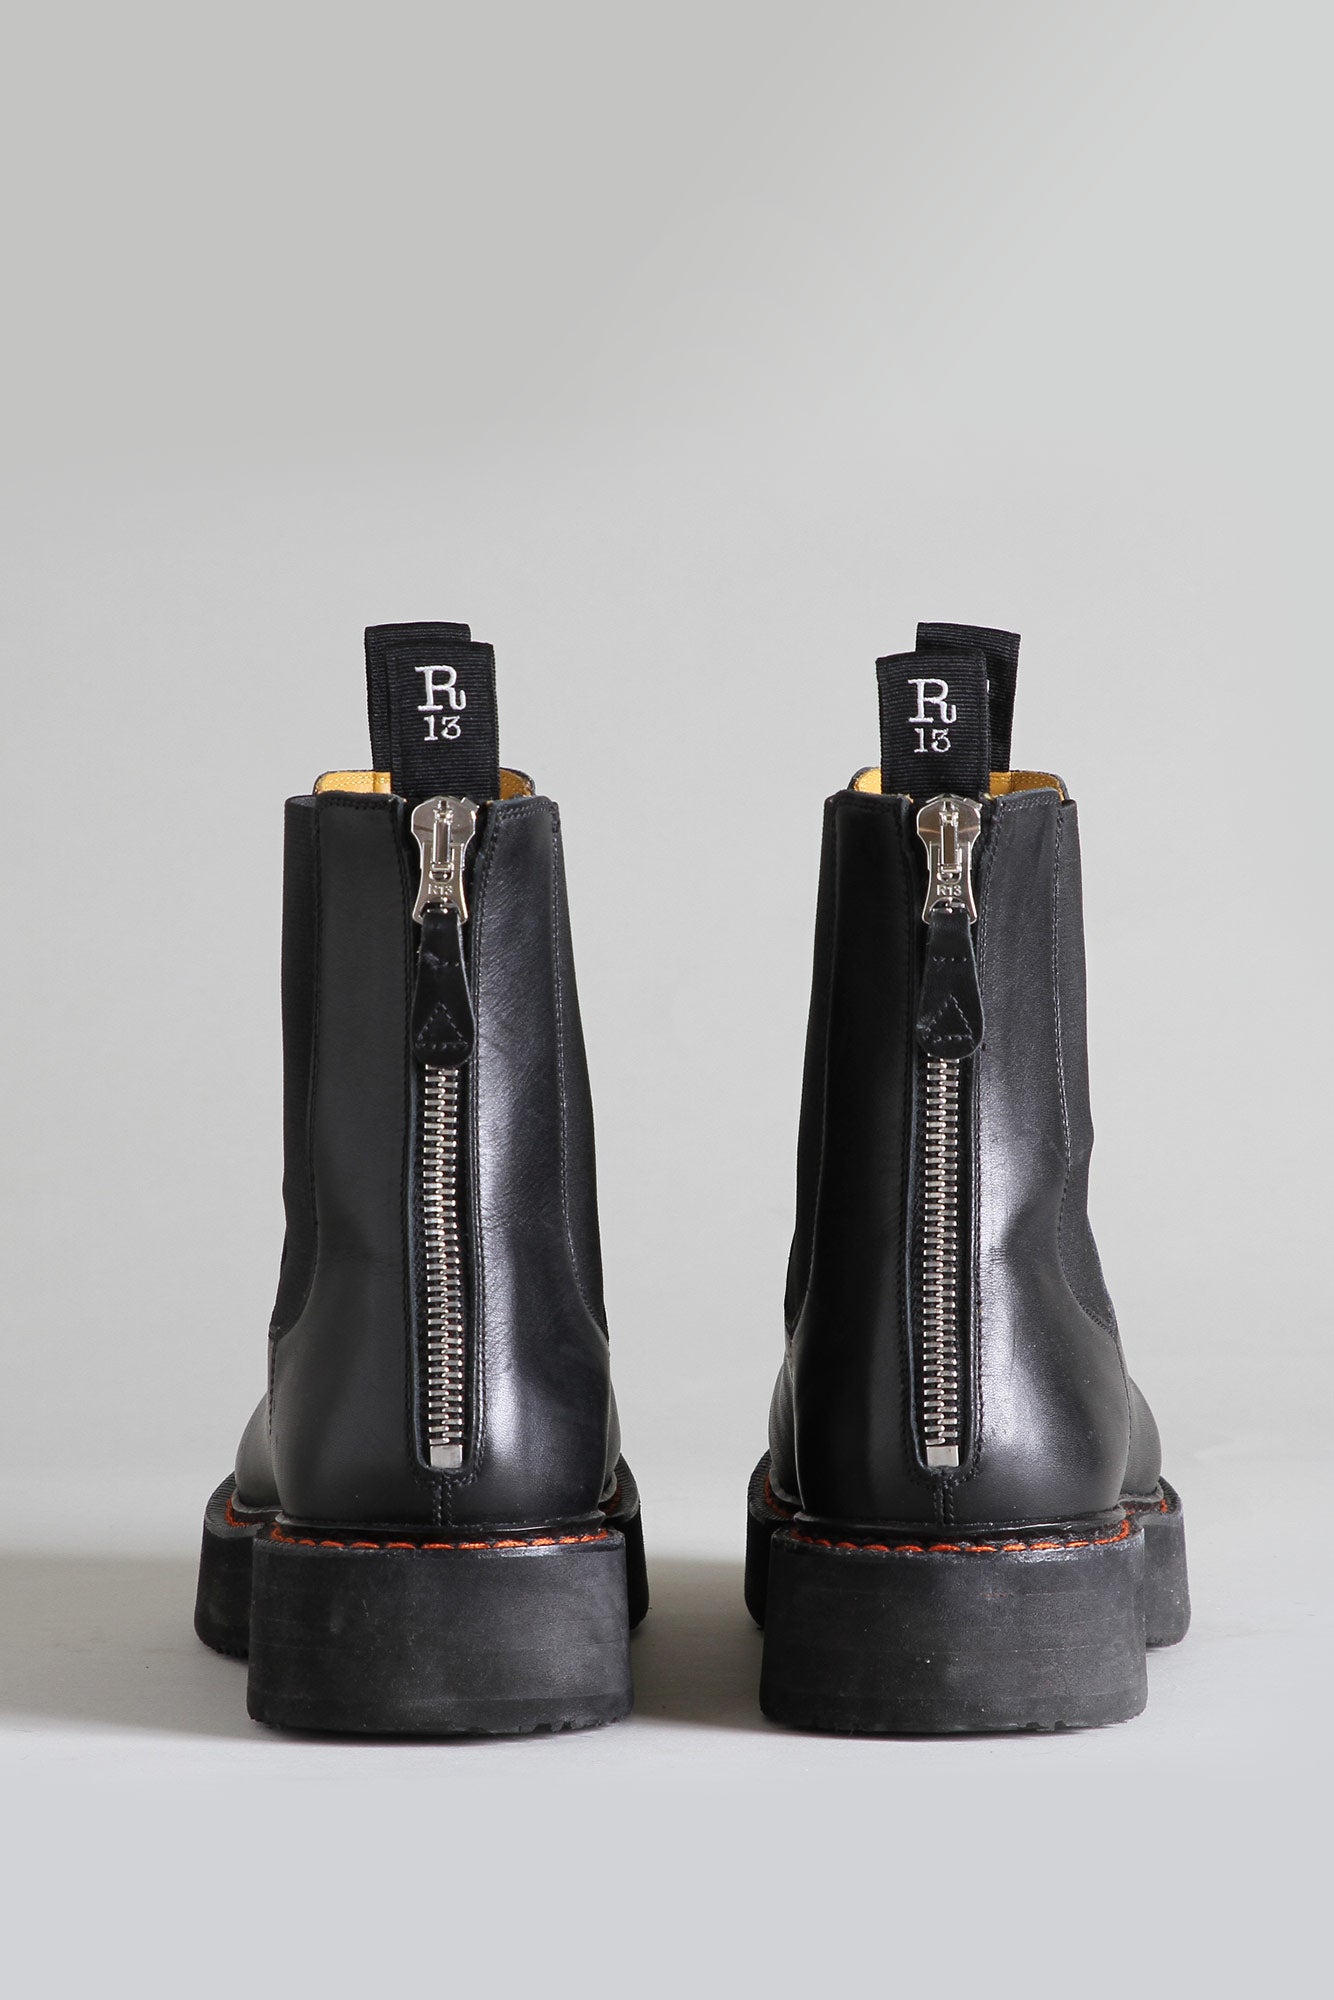 R13 Leather Boots in Black